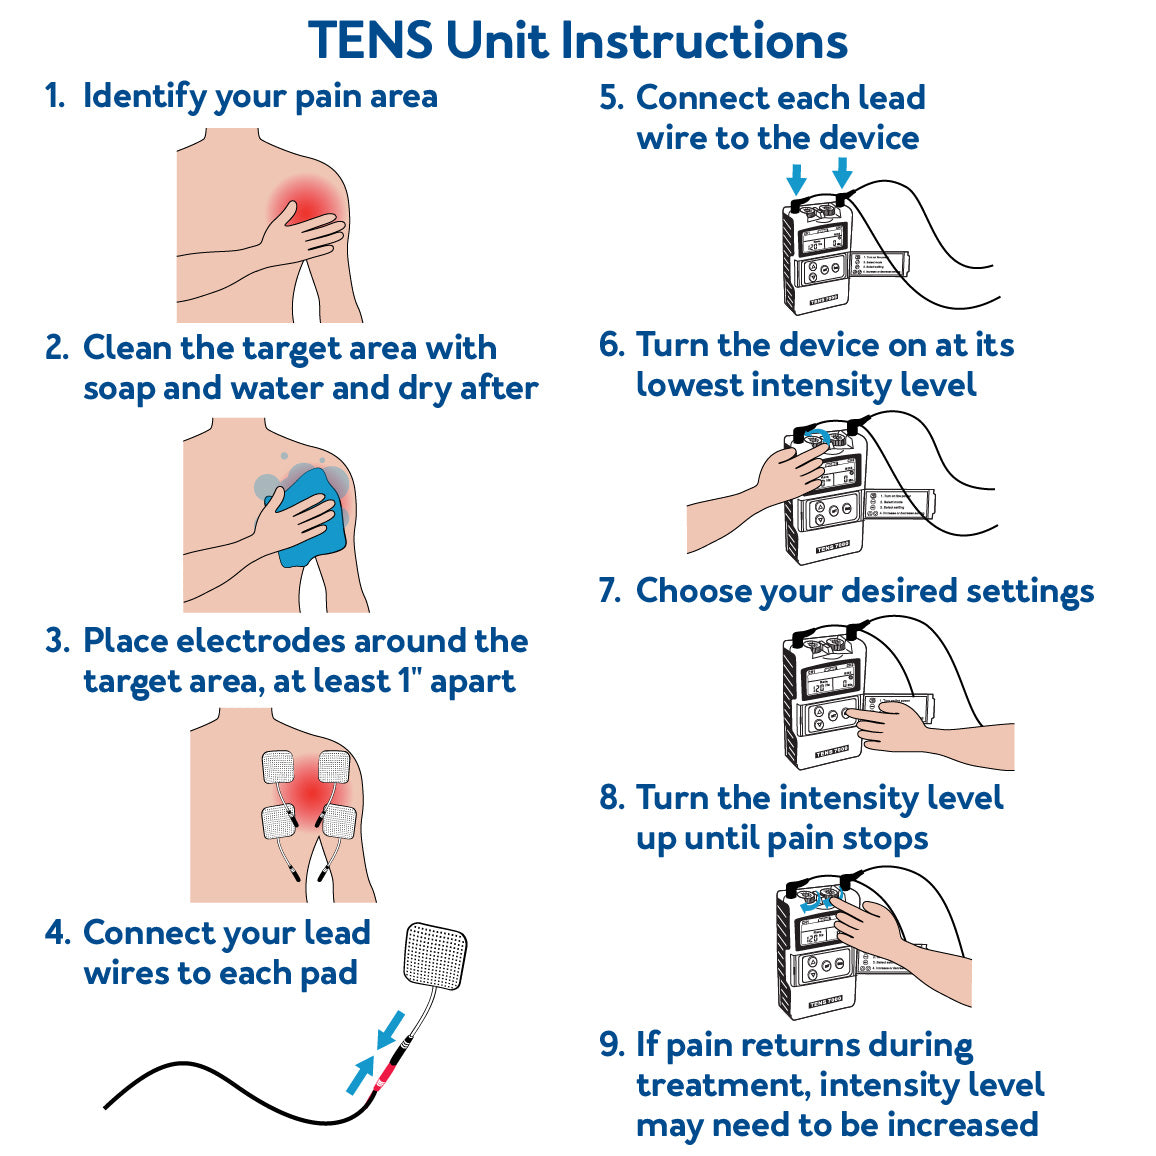 TENS Unit Instructions: 1. Identify your pain area 2. Clean the target area with soap and water and dry after 3. Place electrodes around the target area, at least 1